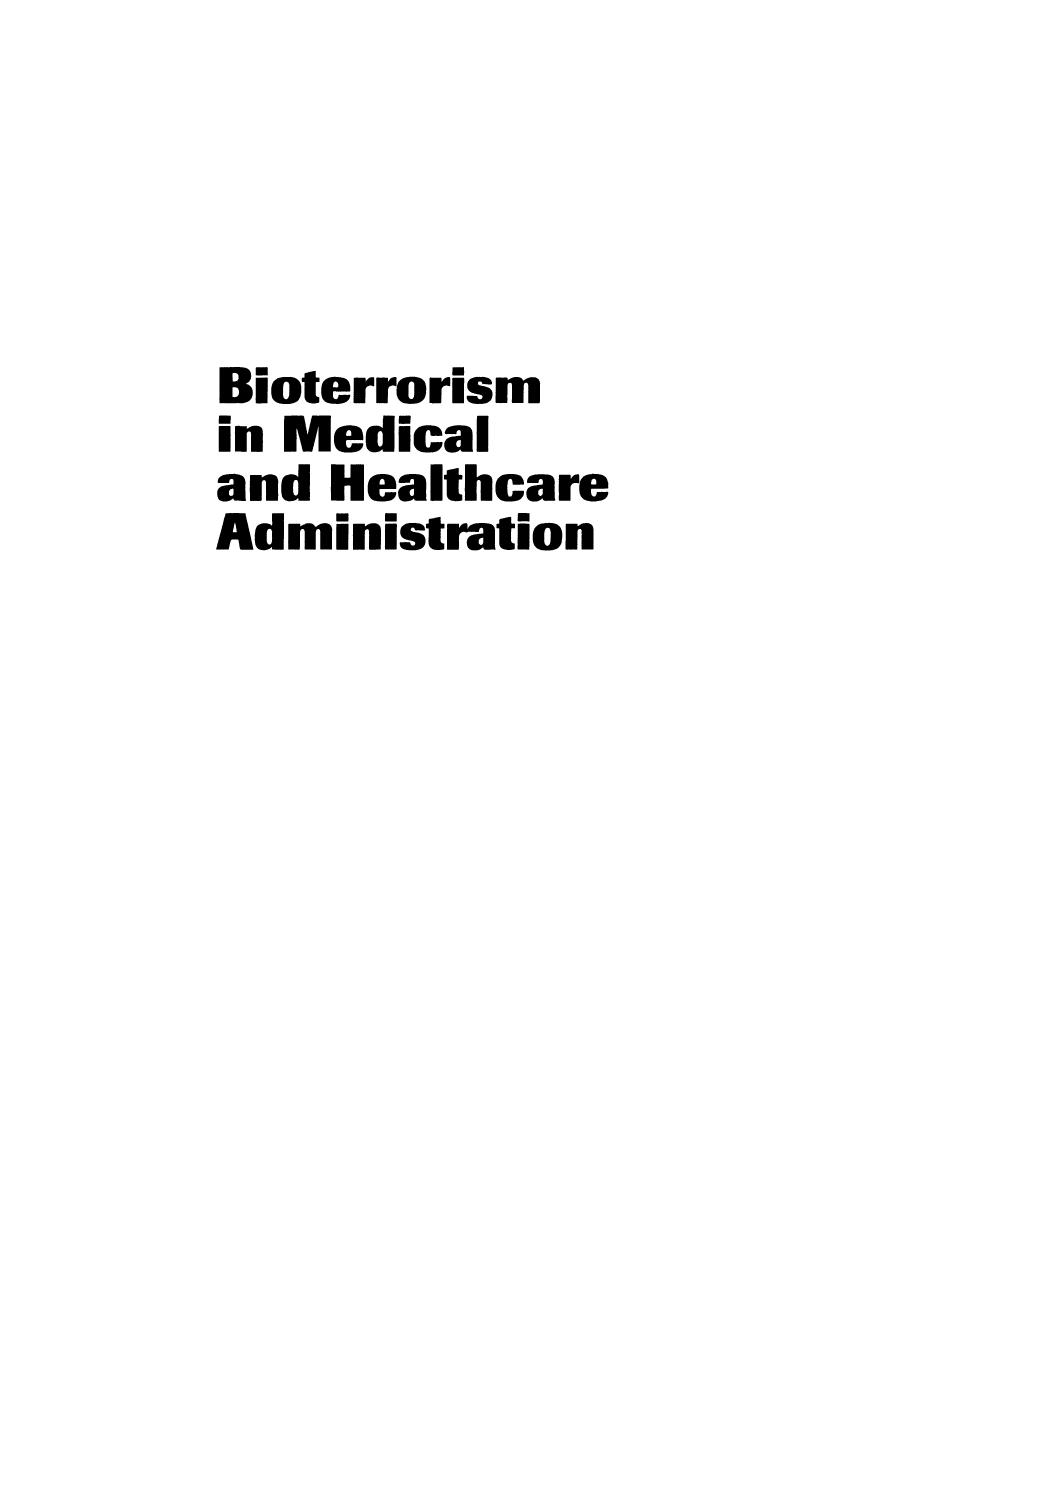 Bioterrorism in medical and healthcare administration